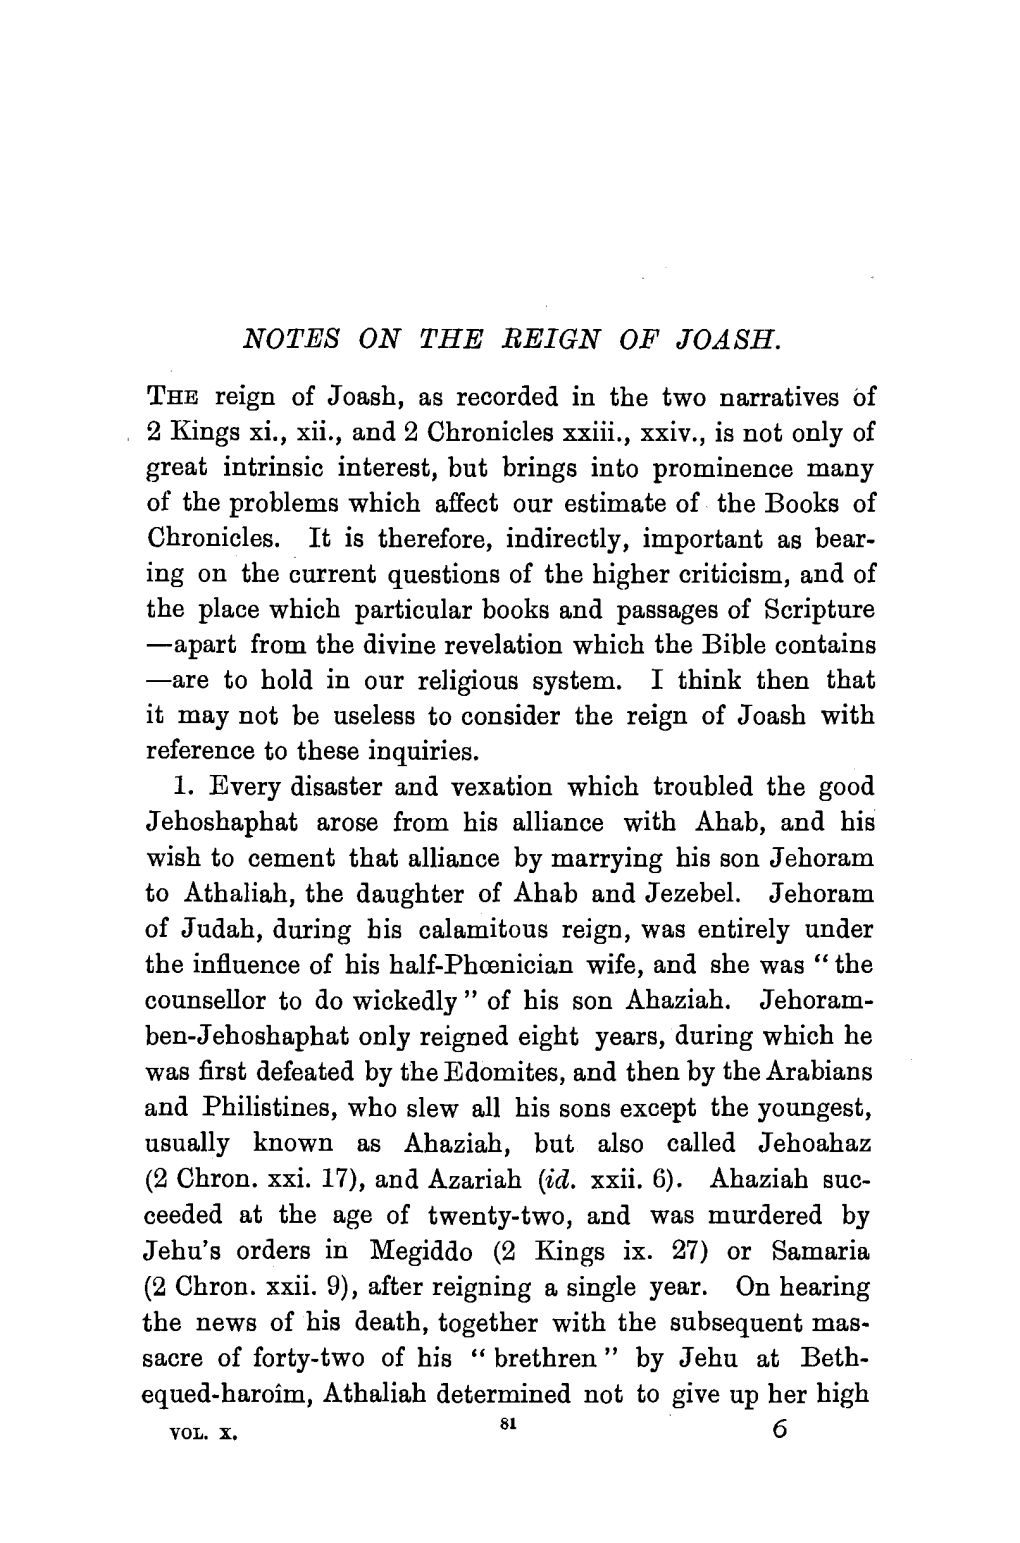 NOTES on the REIGN of JOASH. the Reign of J Oash, As Recorded In